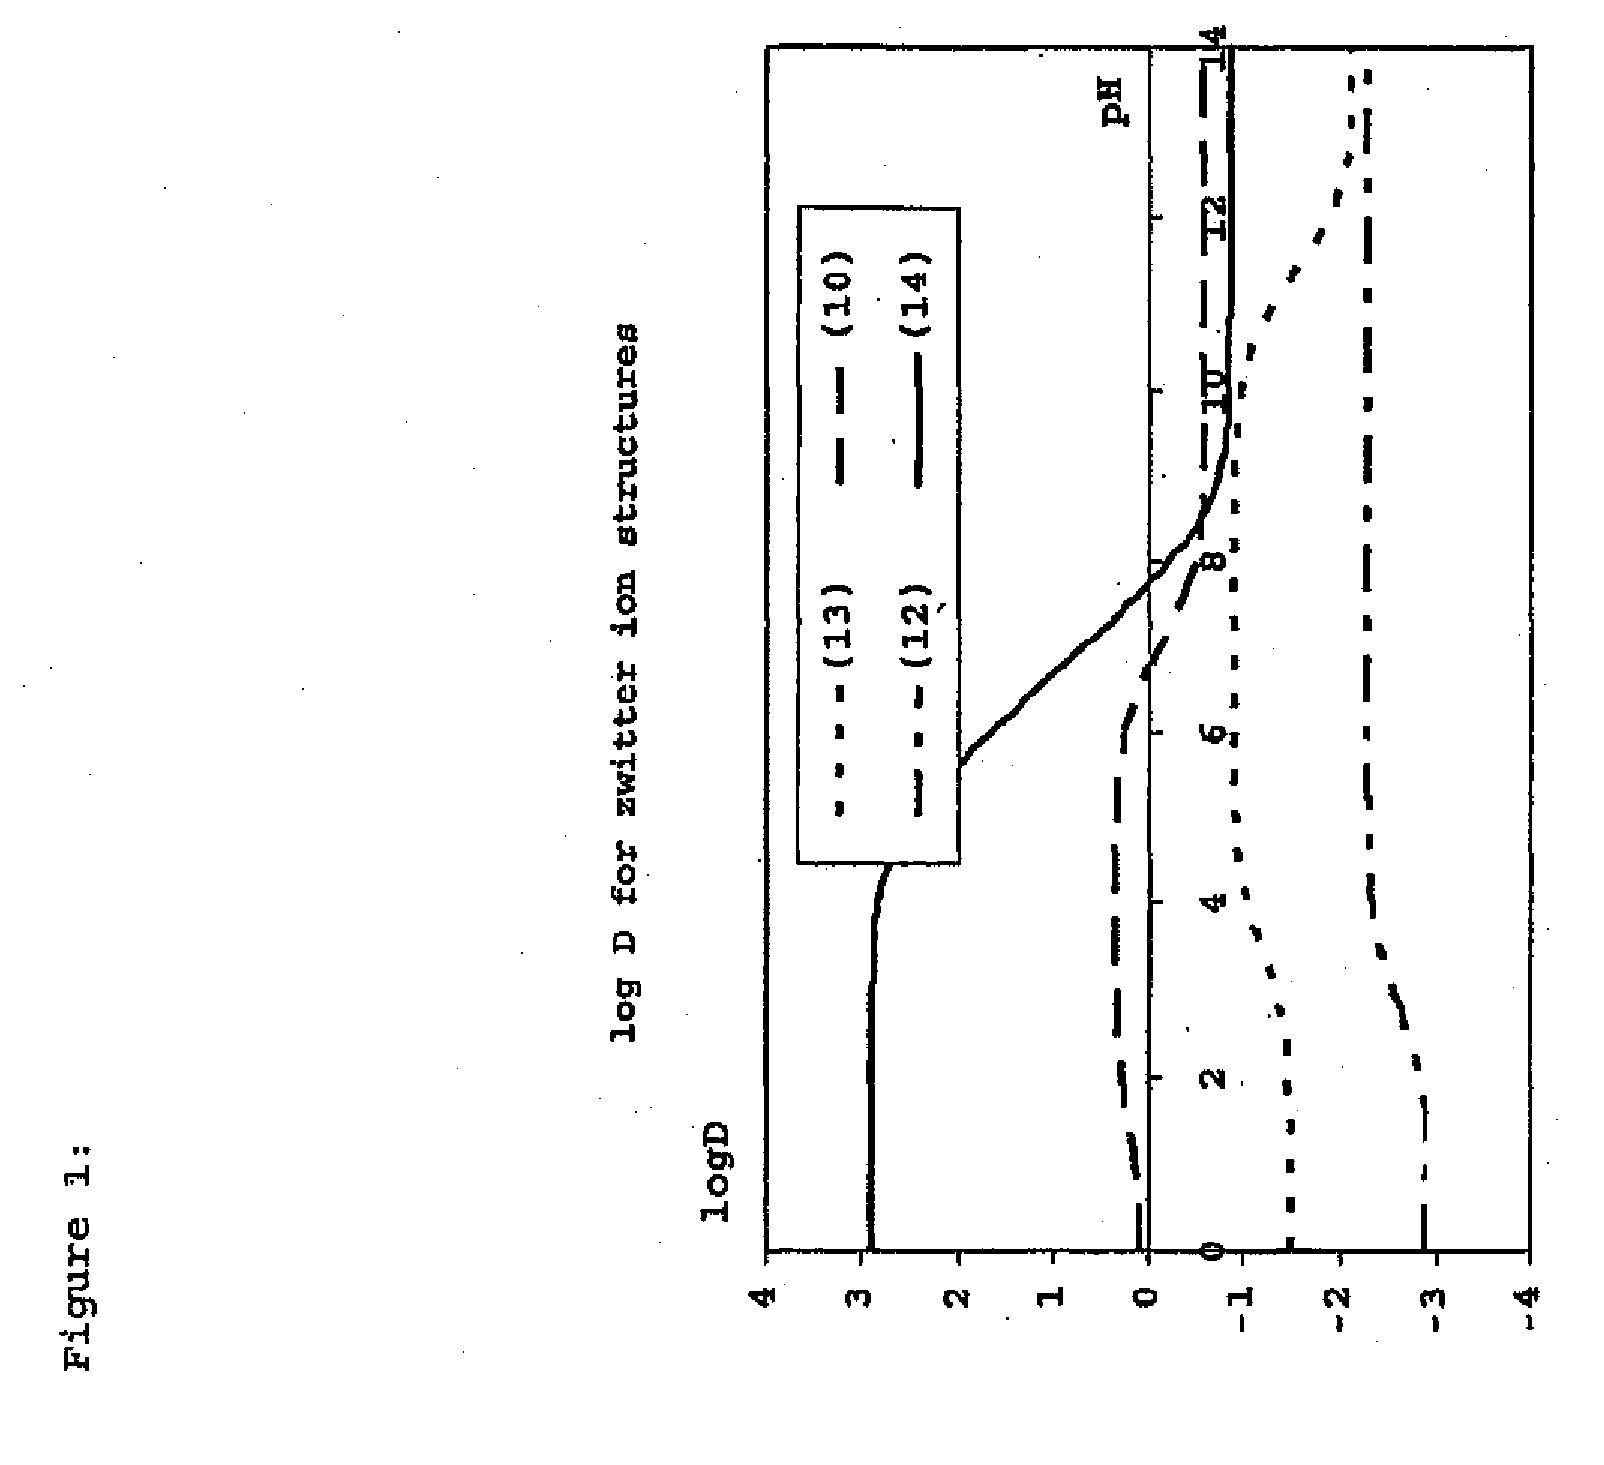 Construction and use of transfection enhancer elements